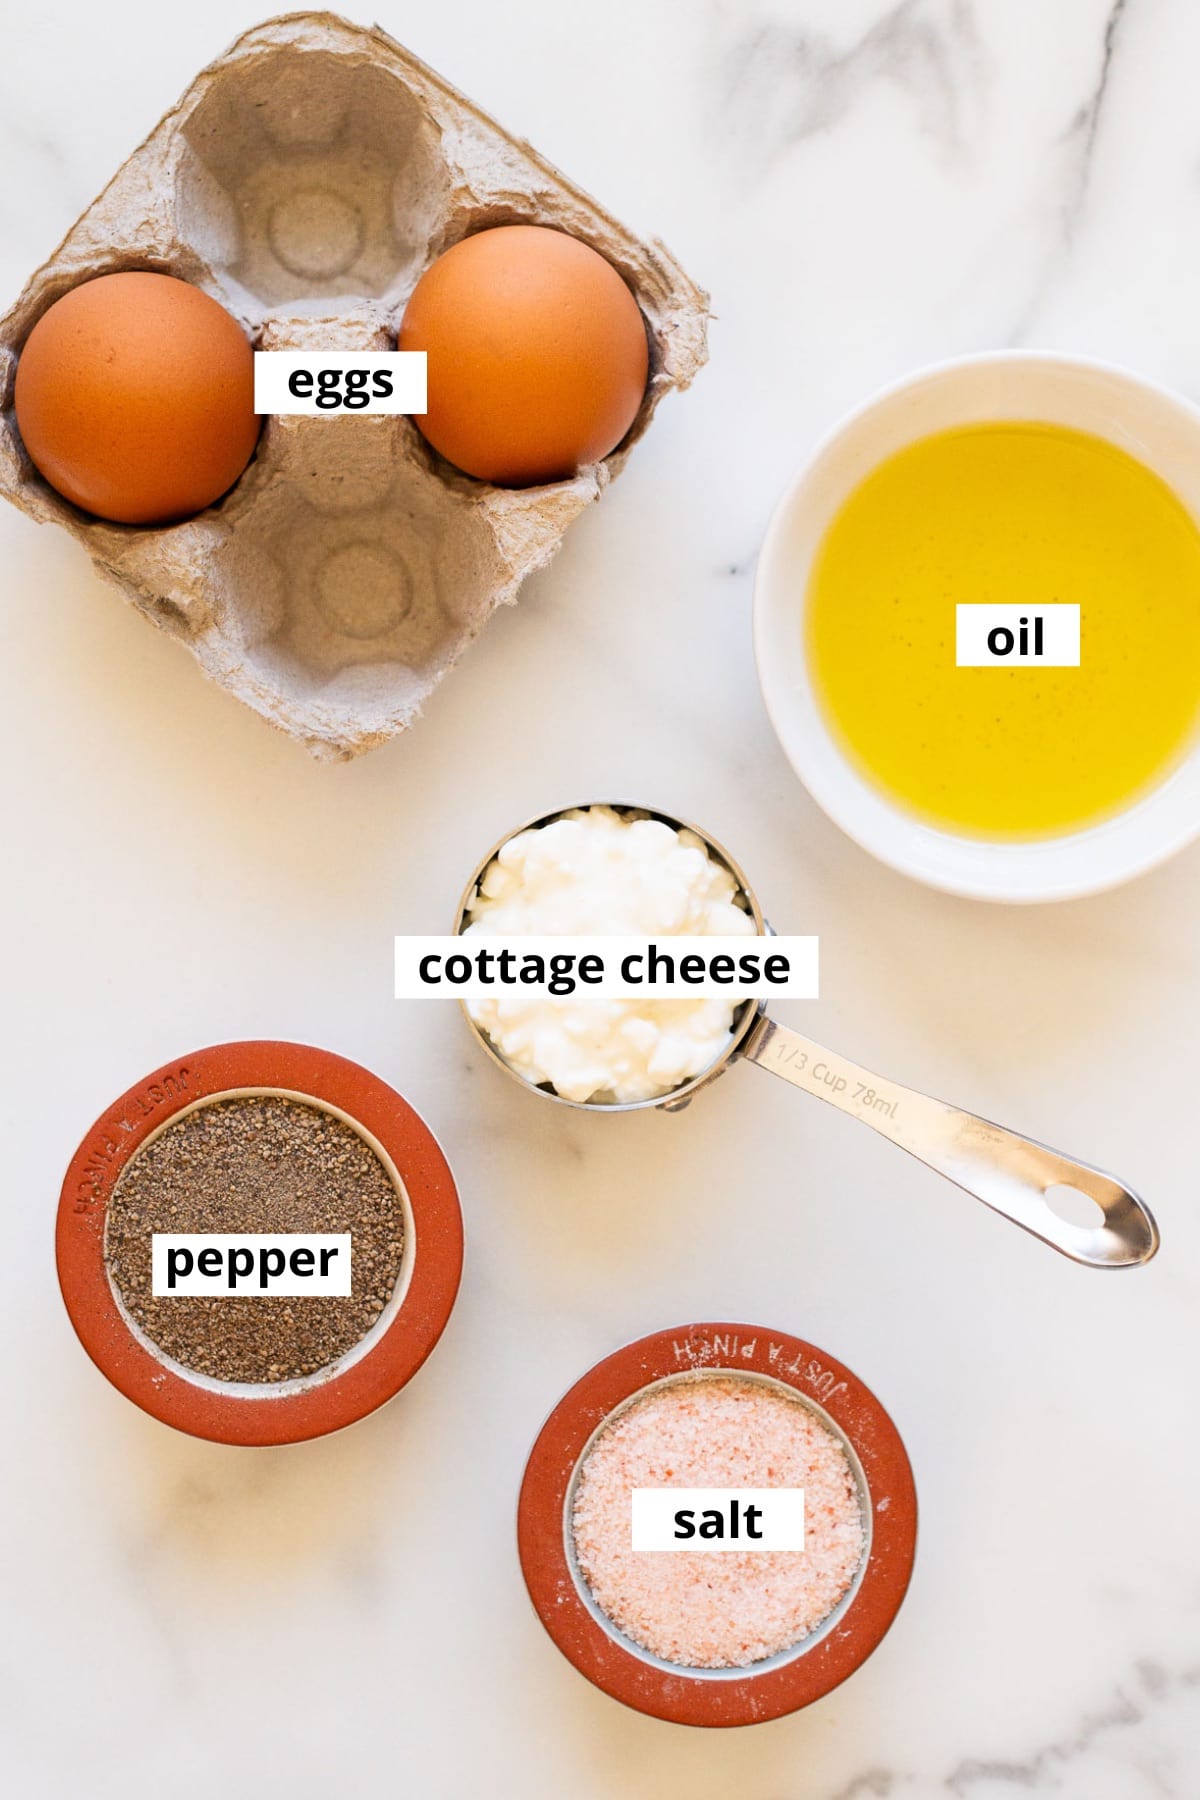 Eggs, cottage cheese, oil, salt and pepper.